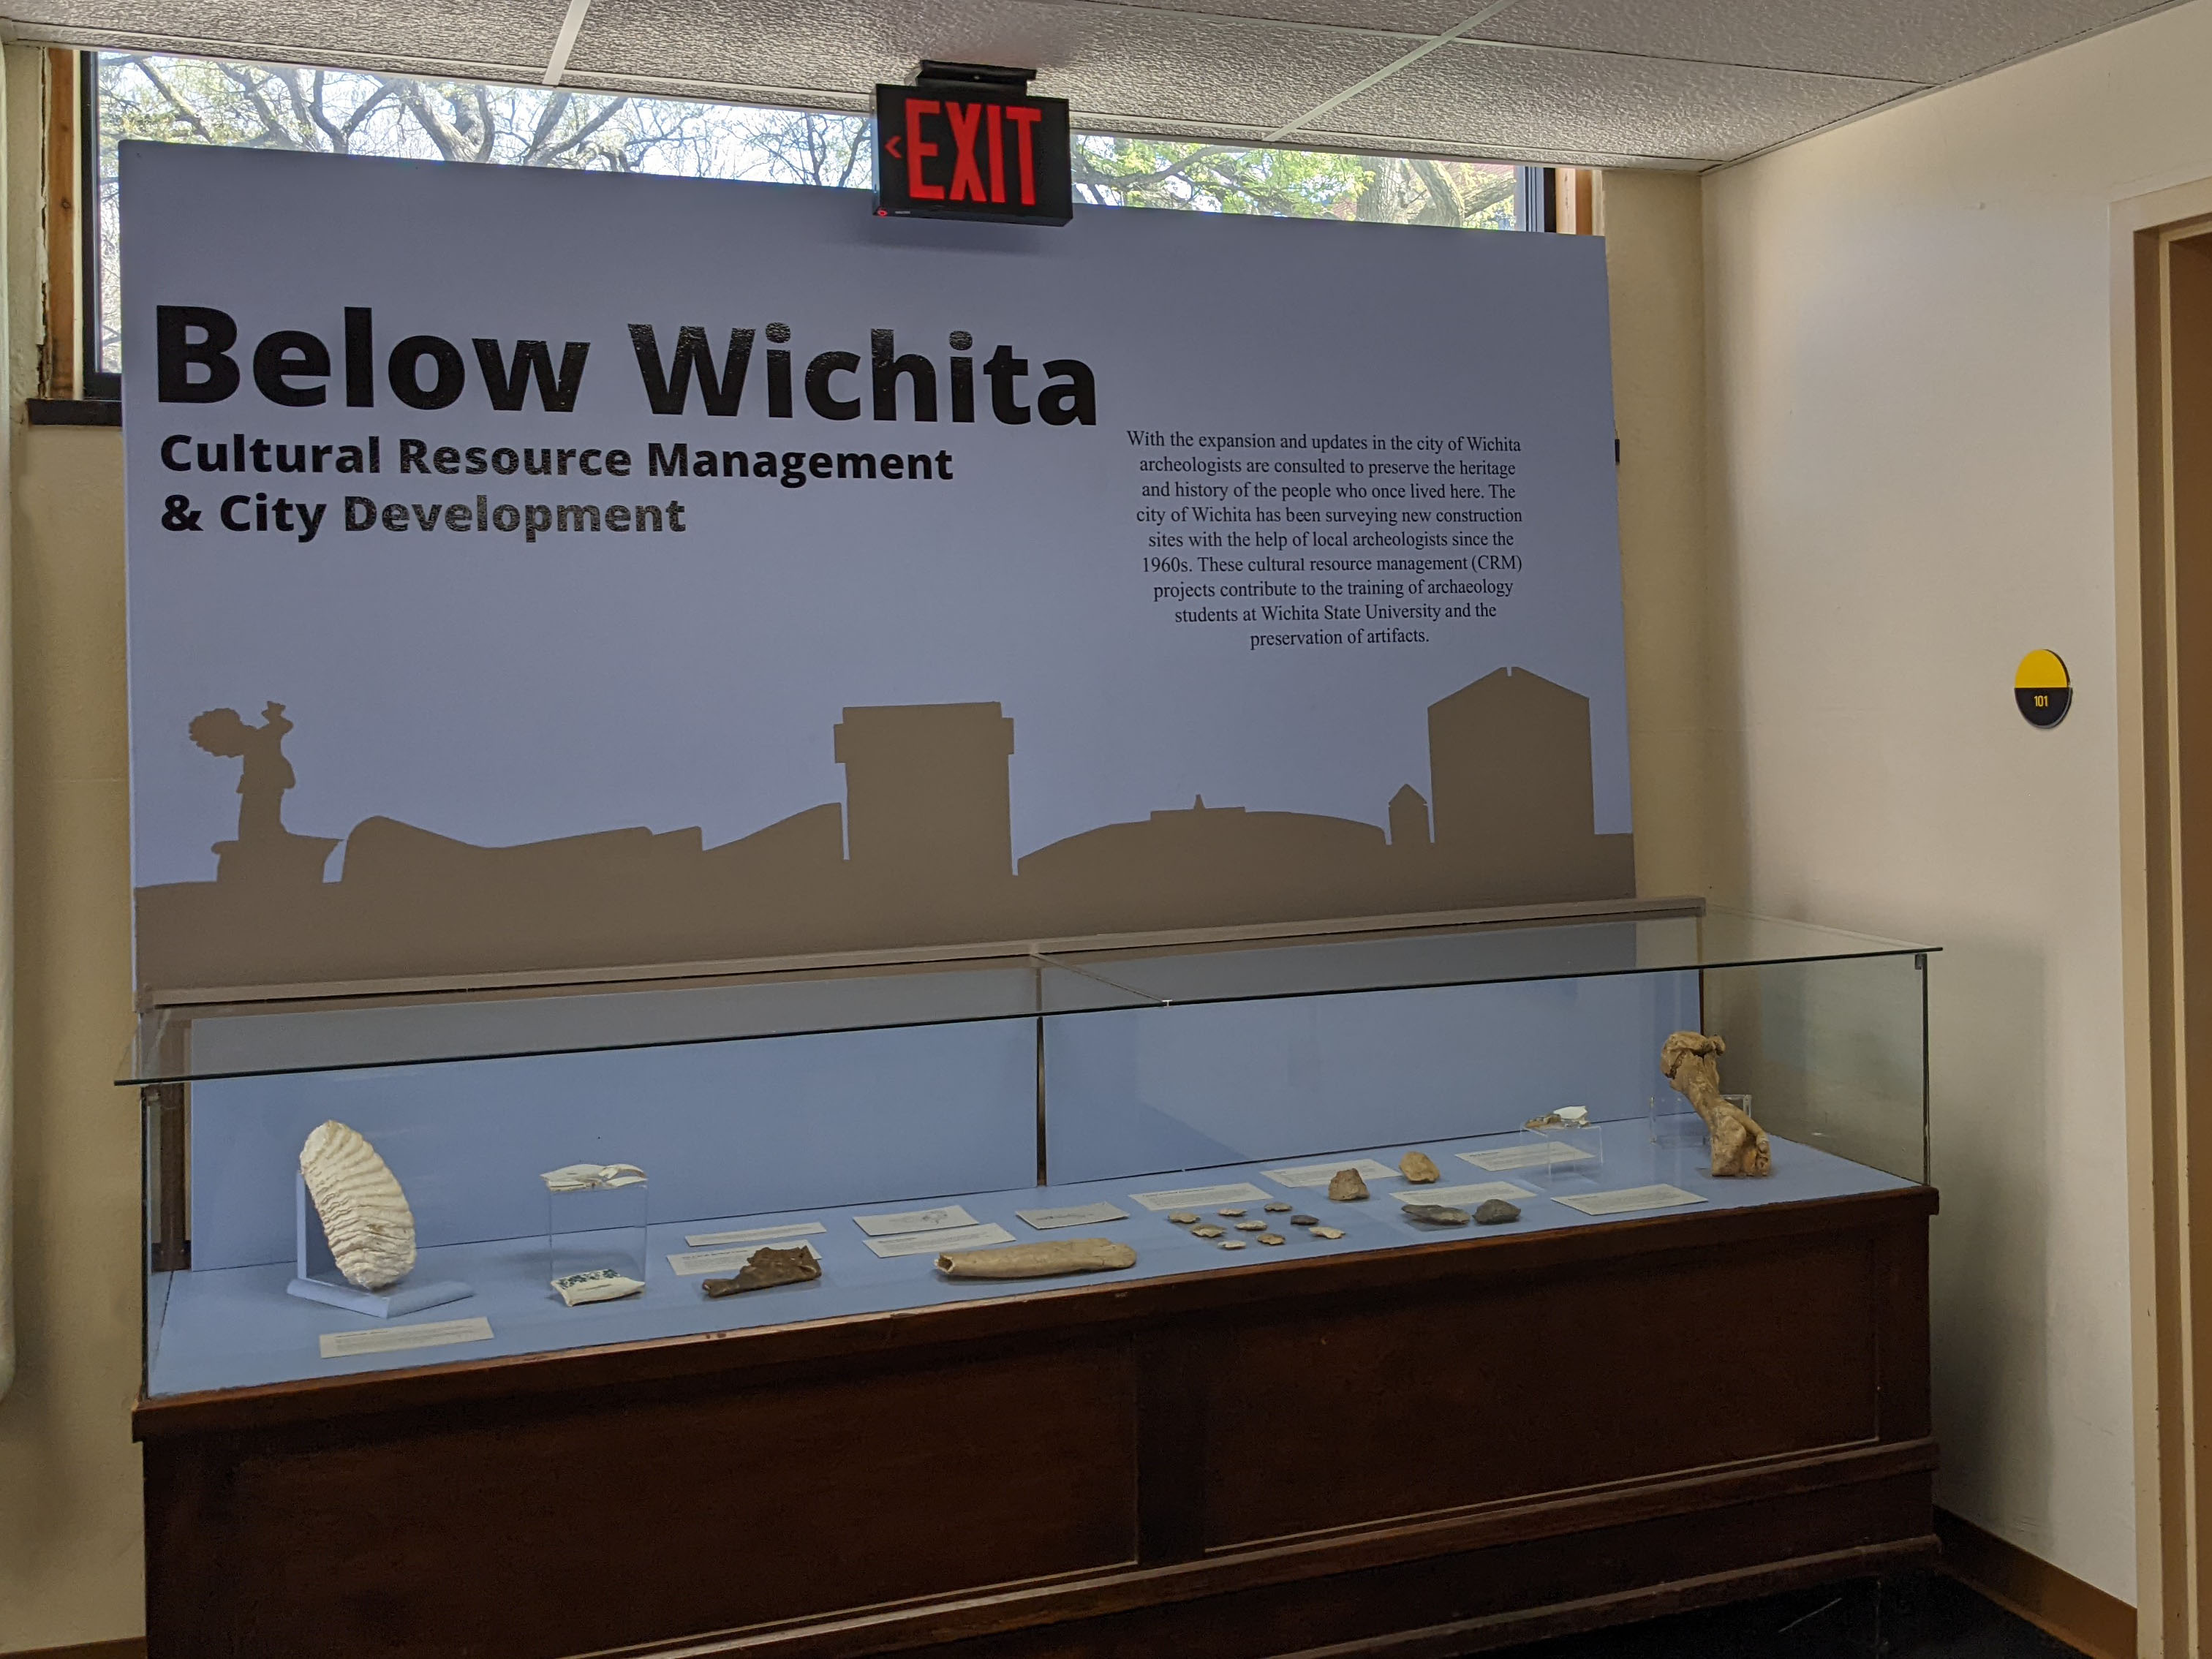 Exhibit case with objects inside. Title reads "Below Wichita: Cultural Resource Management & City Development".